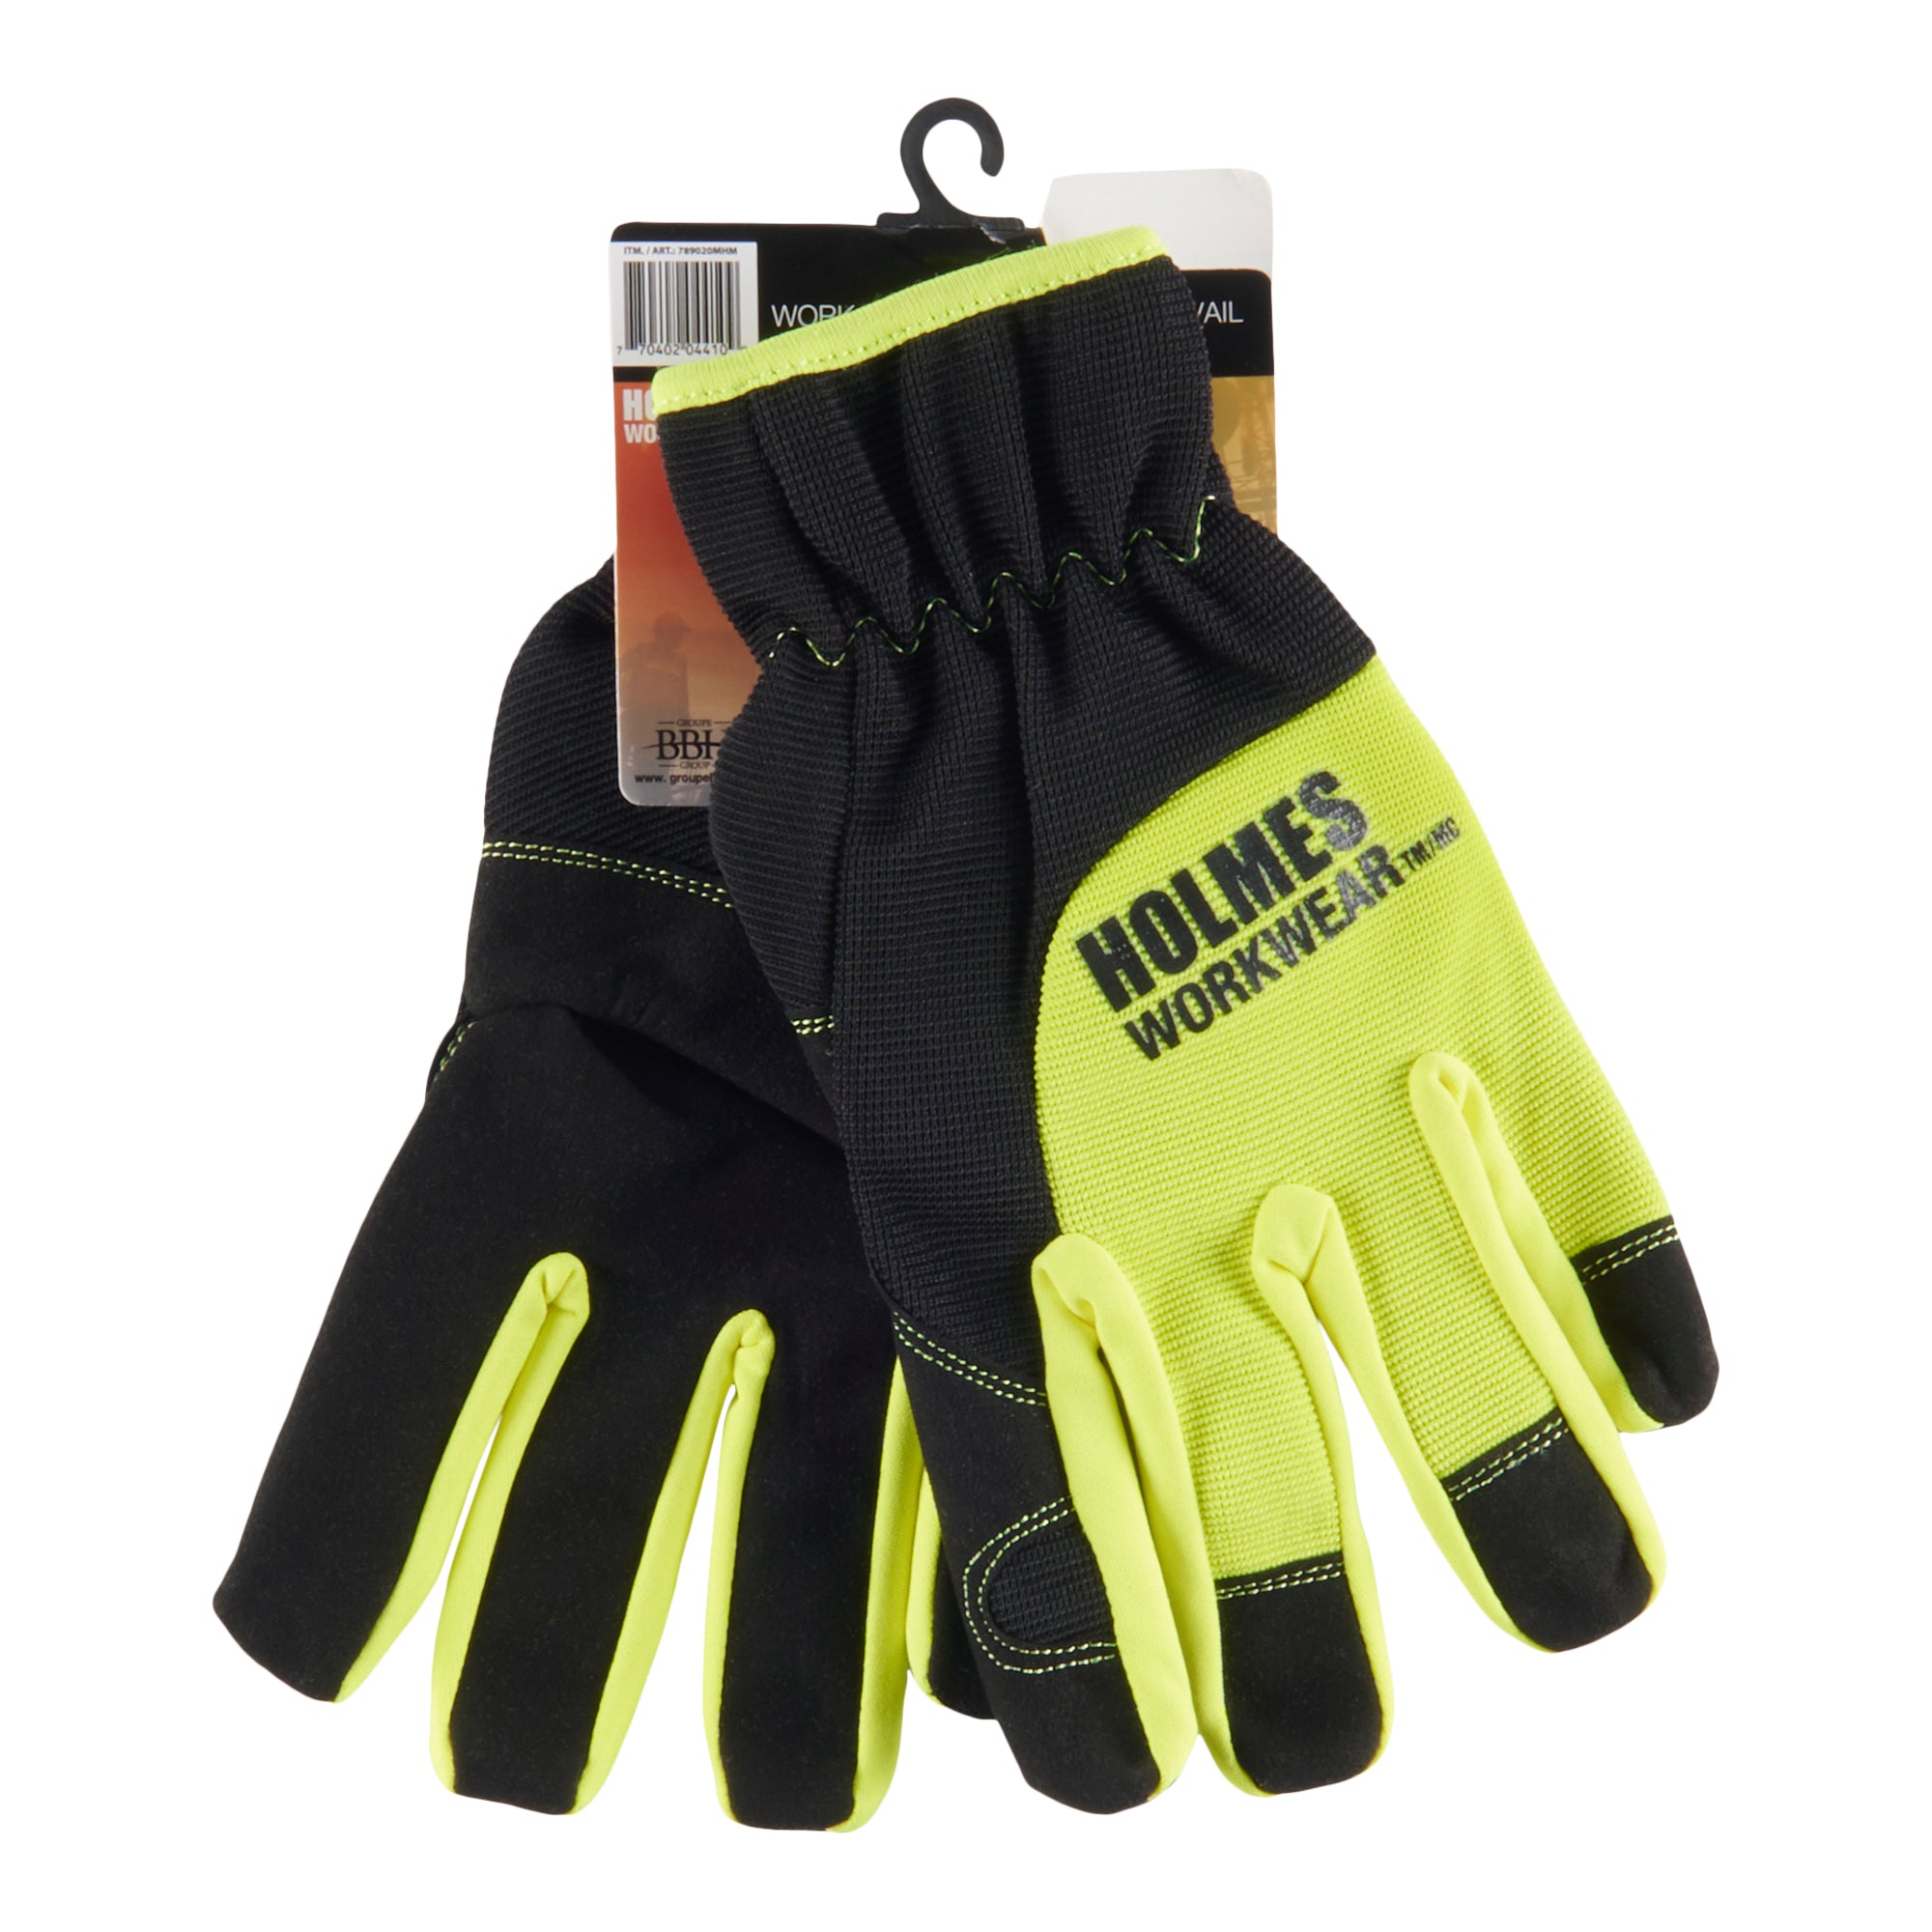 Holmes Off-White Leather Gloves for Men - Large